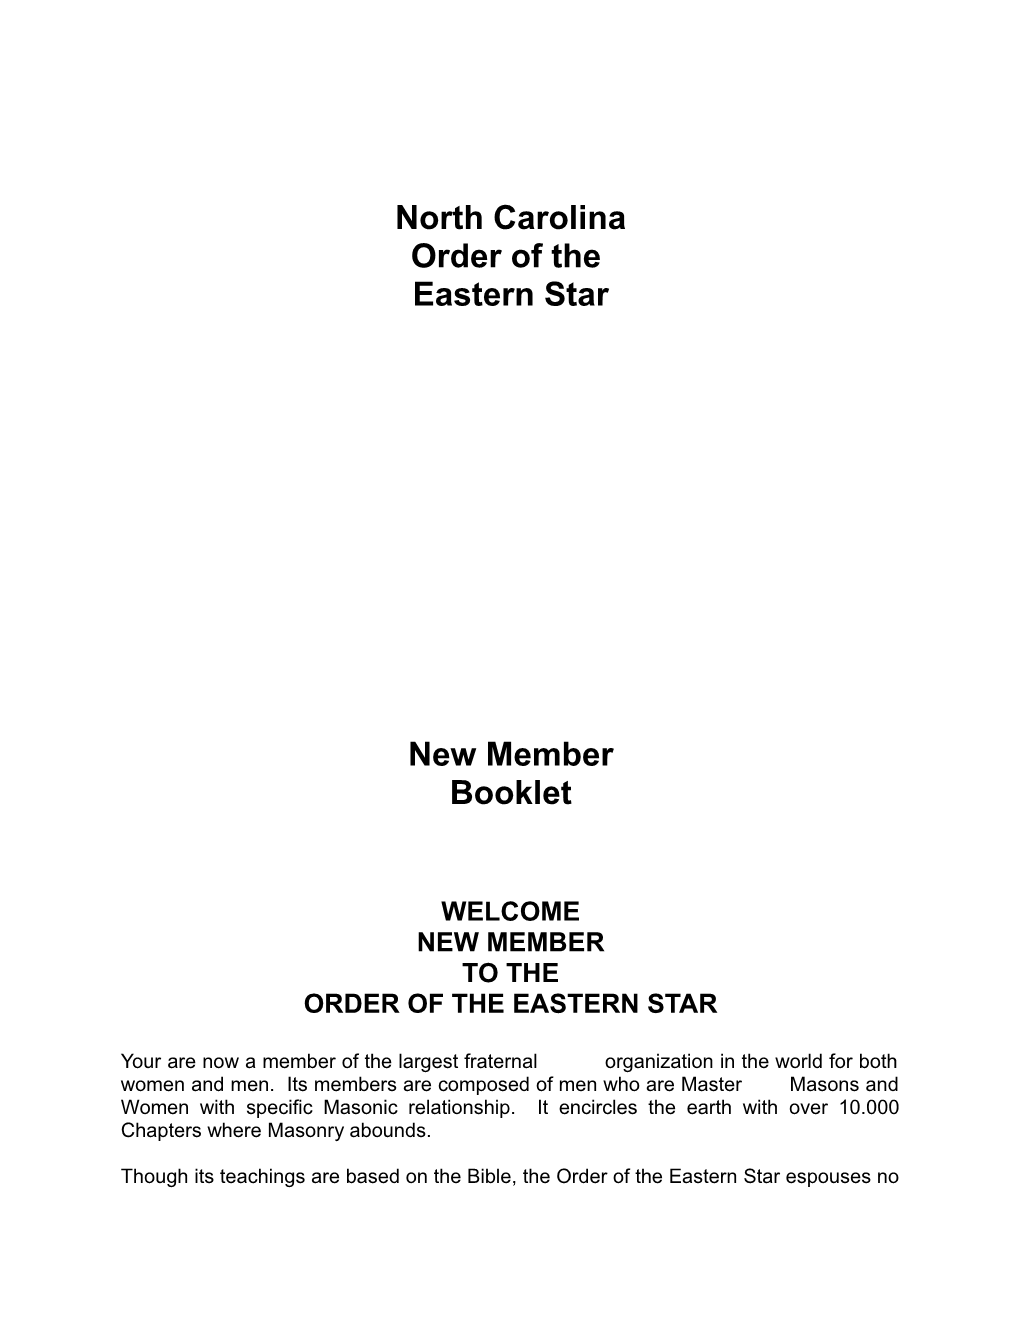 Order of the Eastern Star s1